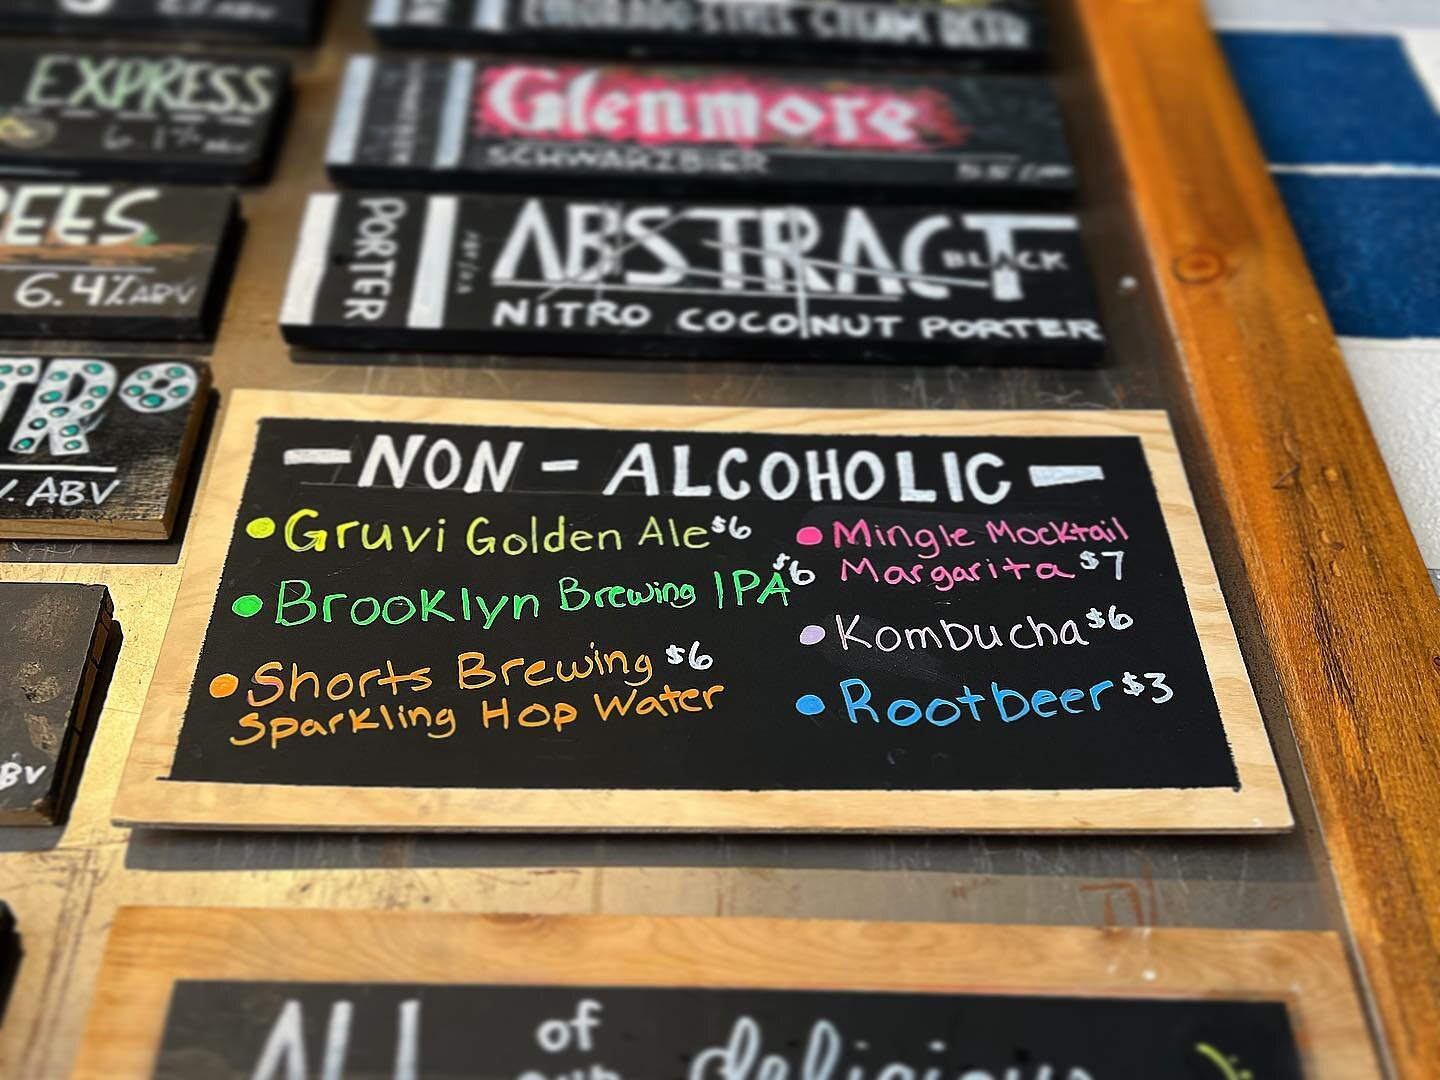 Have you checked out our newly added non-alcoholic options? We&rsquo;re so happy to be able to offer these in addition to our rotating beer taps. 🍻

#stormpeakbrewing #steamboatsprings #colorado #craftbeer #nonalcoholic #options #drinktheboat